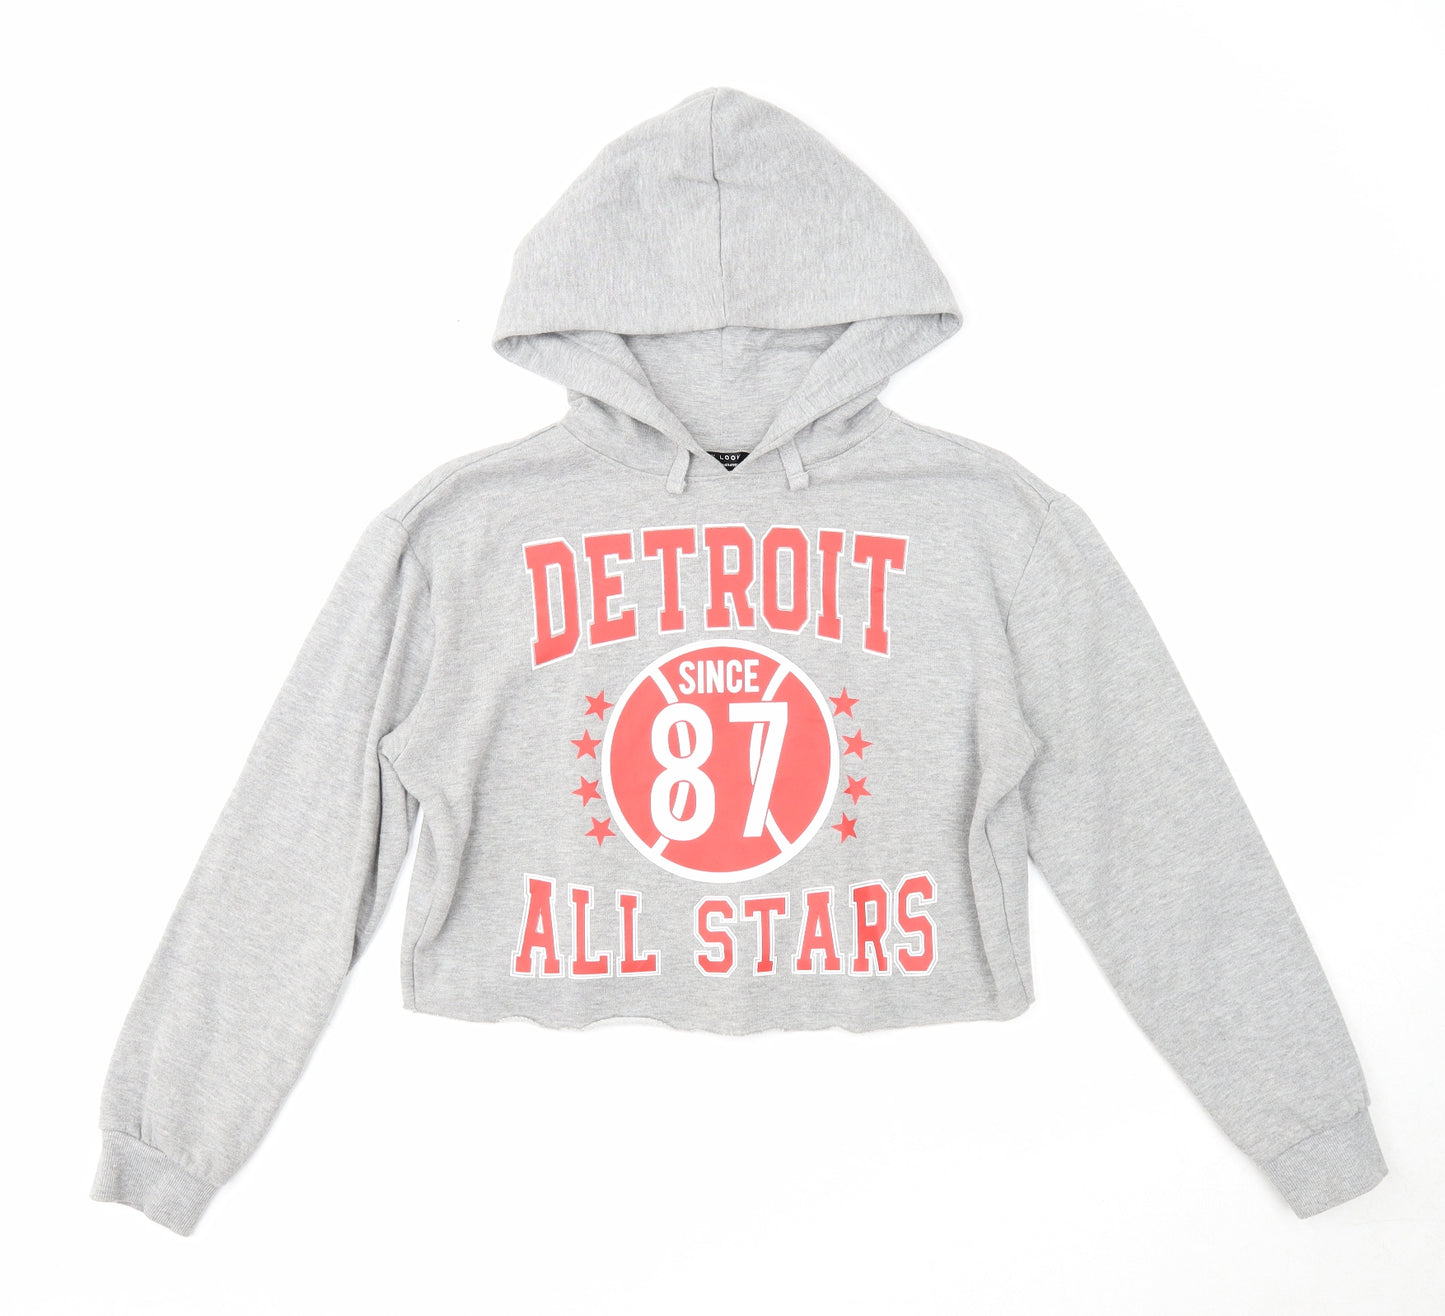 New Look Girls Grey Polyester Pullover Hoodie Size 12-13 Years Pullover - Detroit All Stars